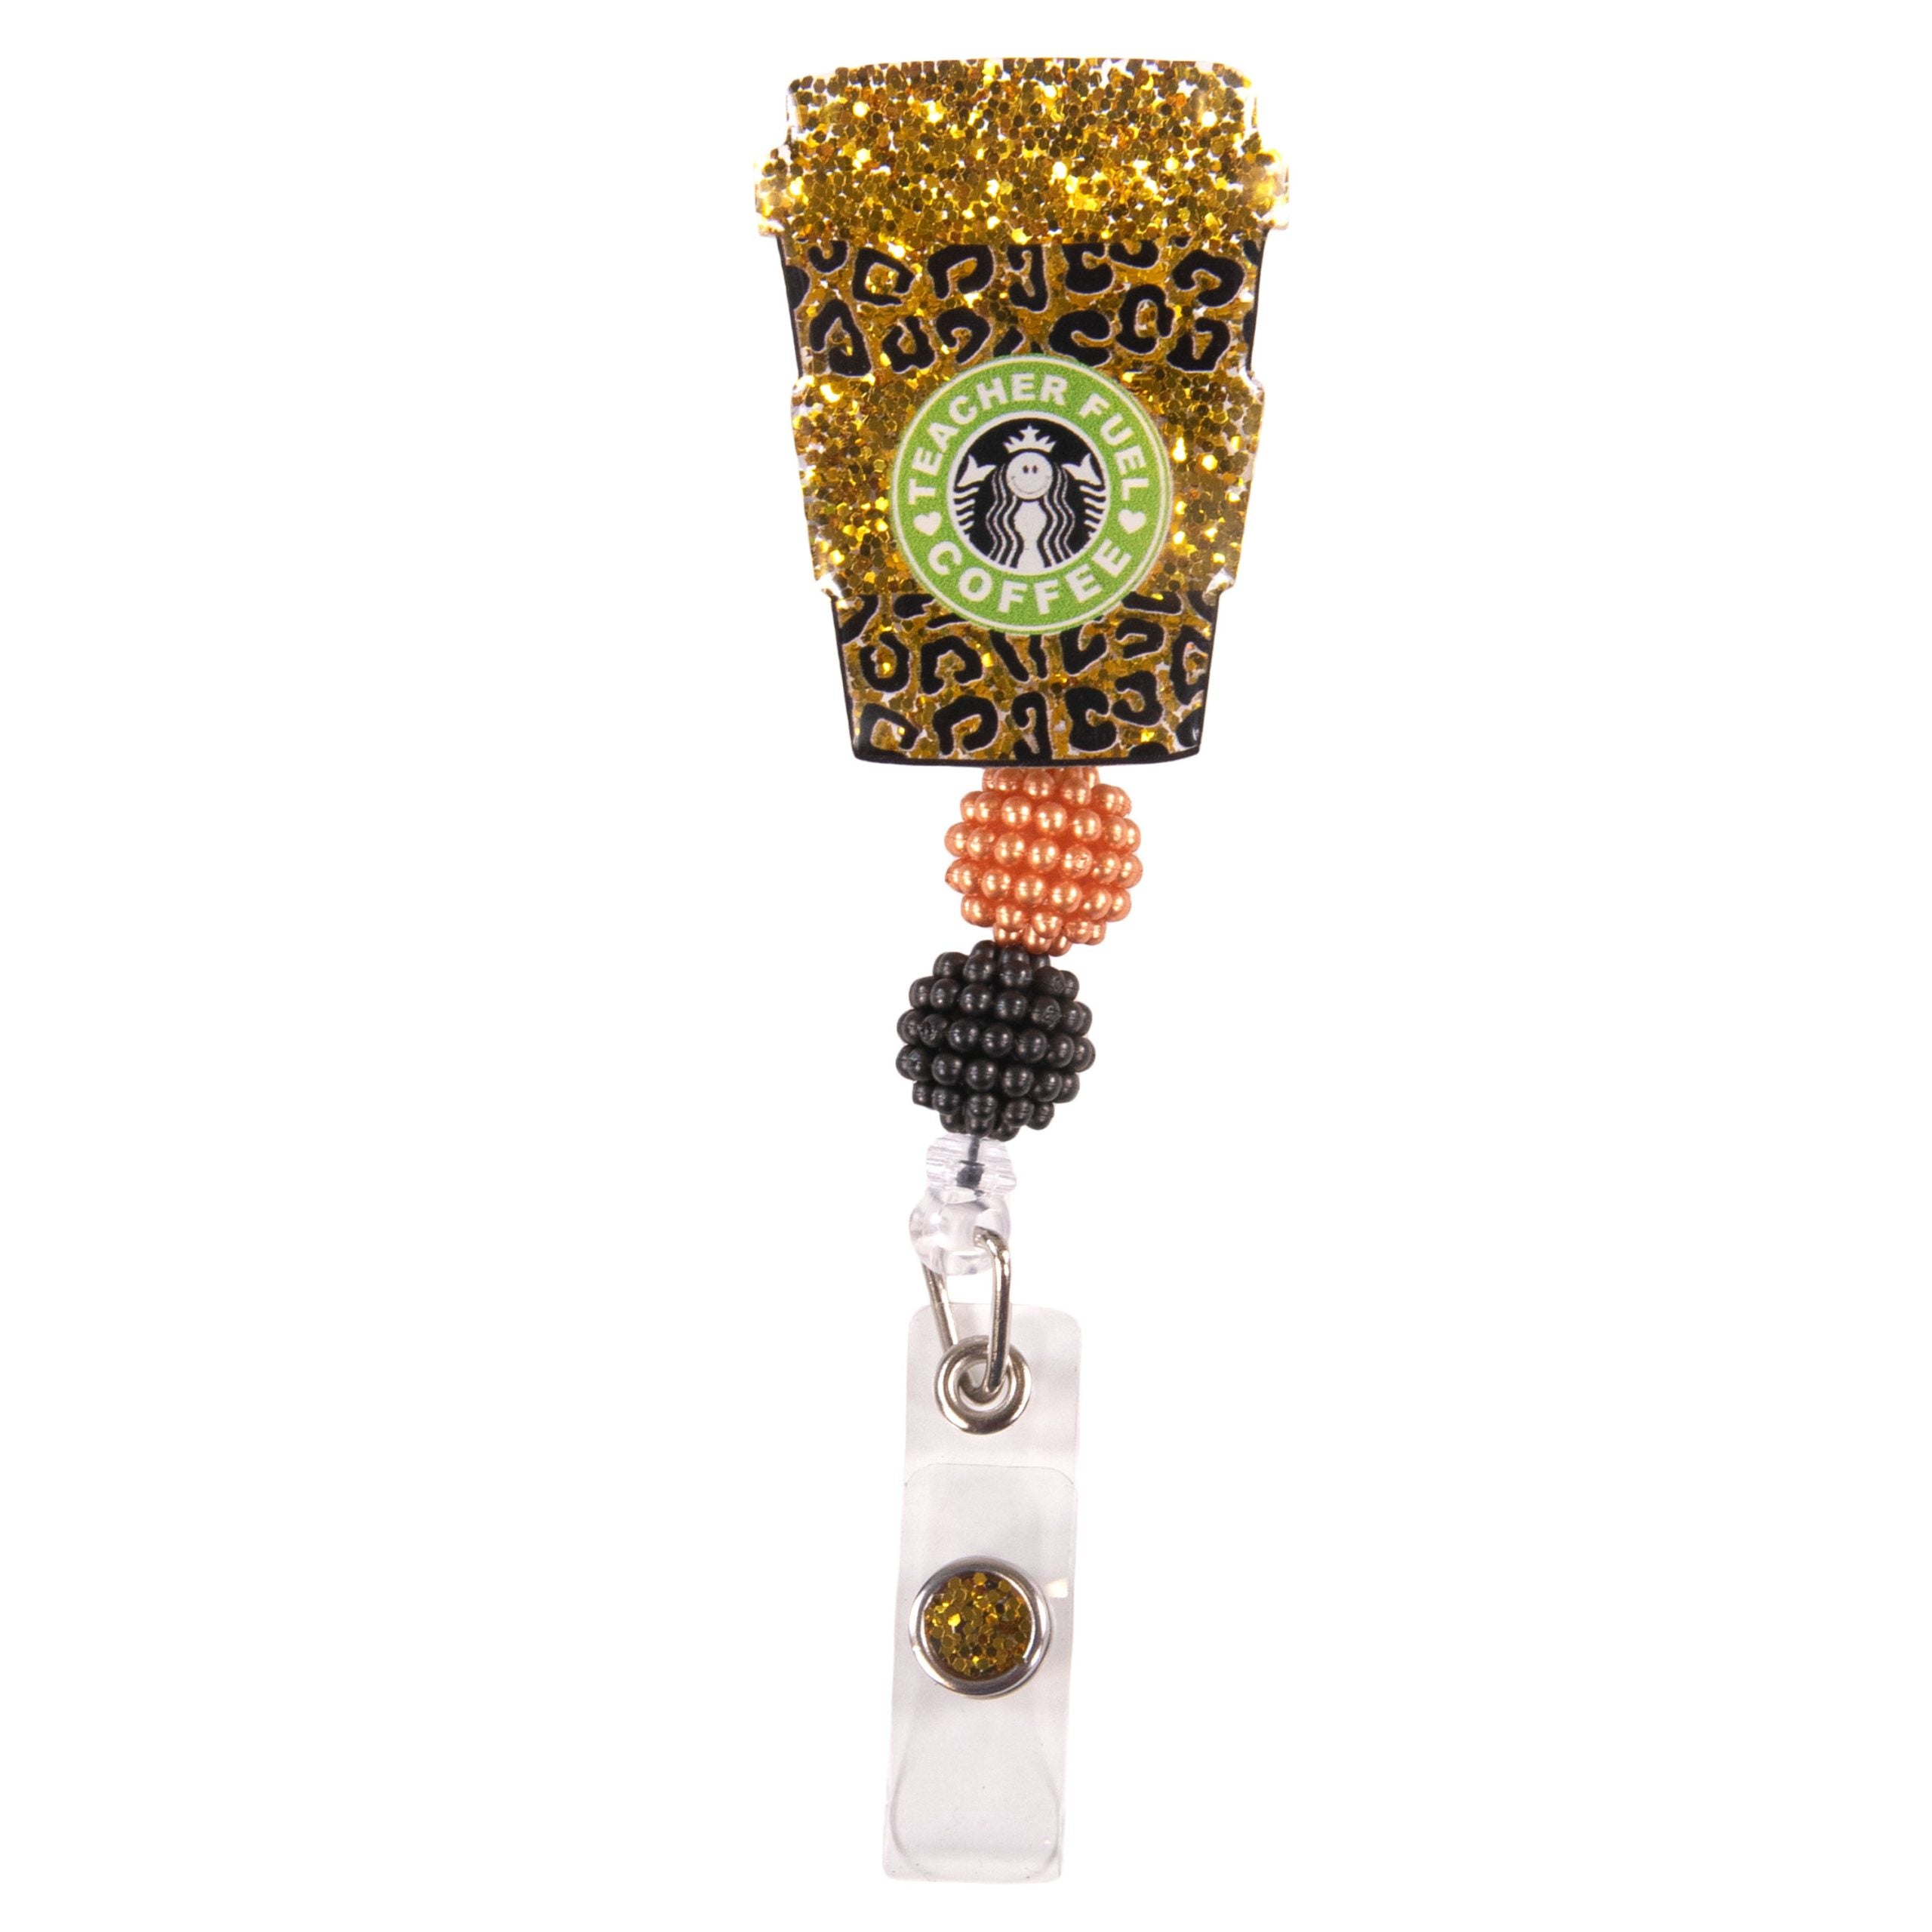 Saved by Grace and Coffee Badge Reel – D and A Design Studio